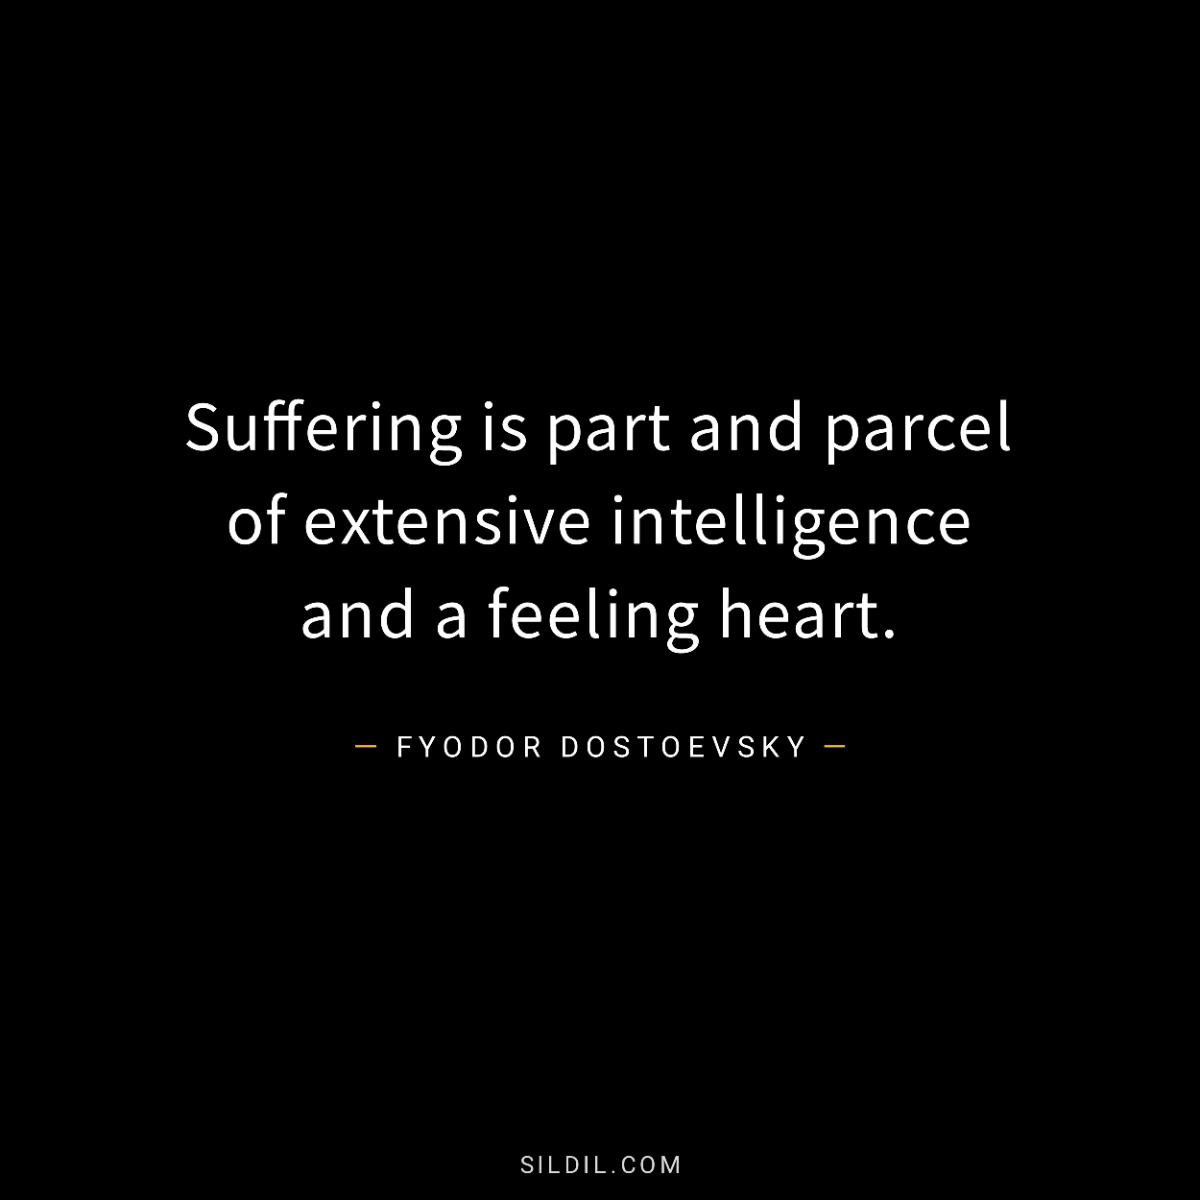 Suffering is part and parcel of extensive intelligence and a feeling heart.